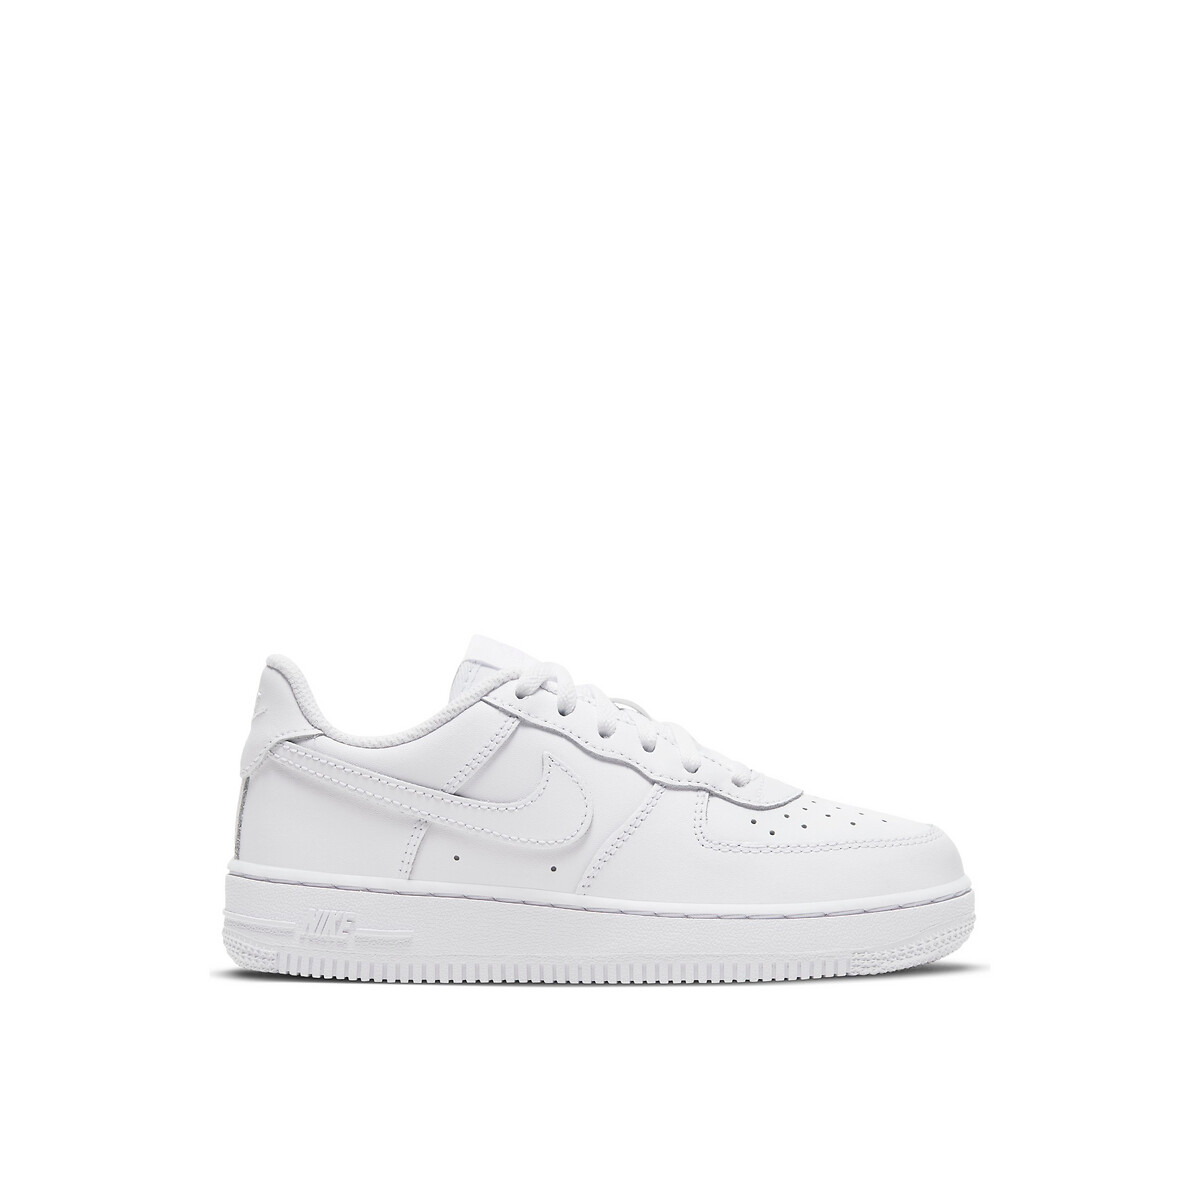 Air force one blanche | La Redoute